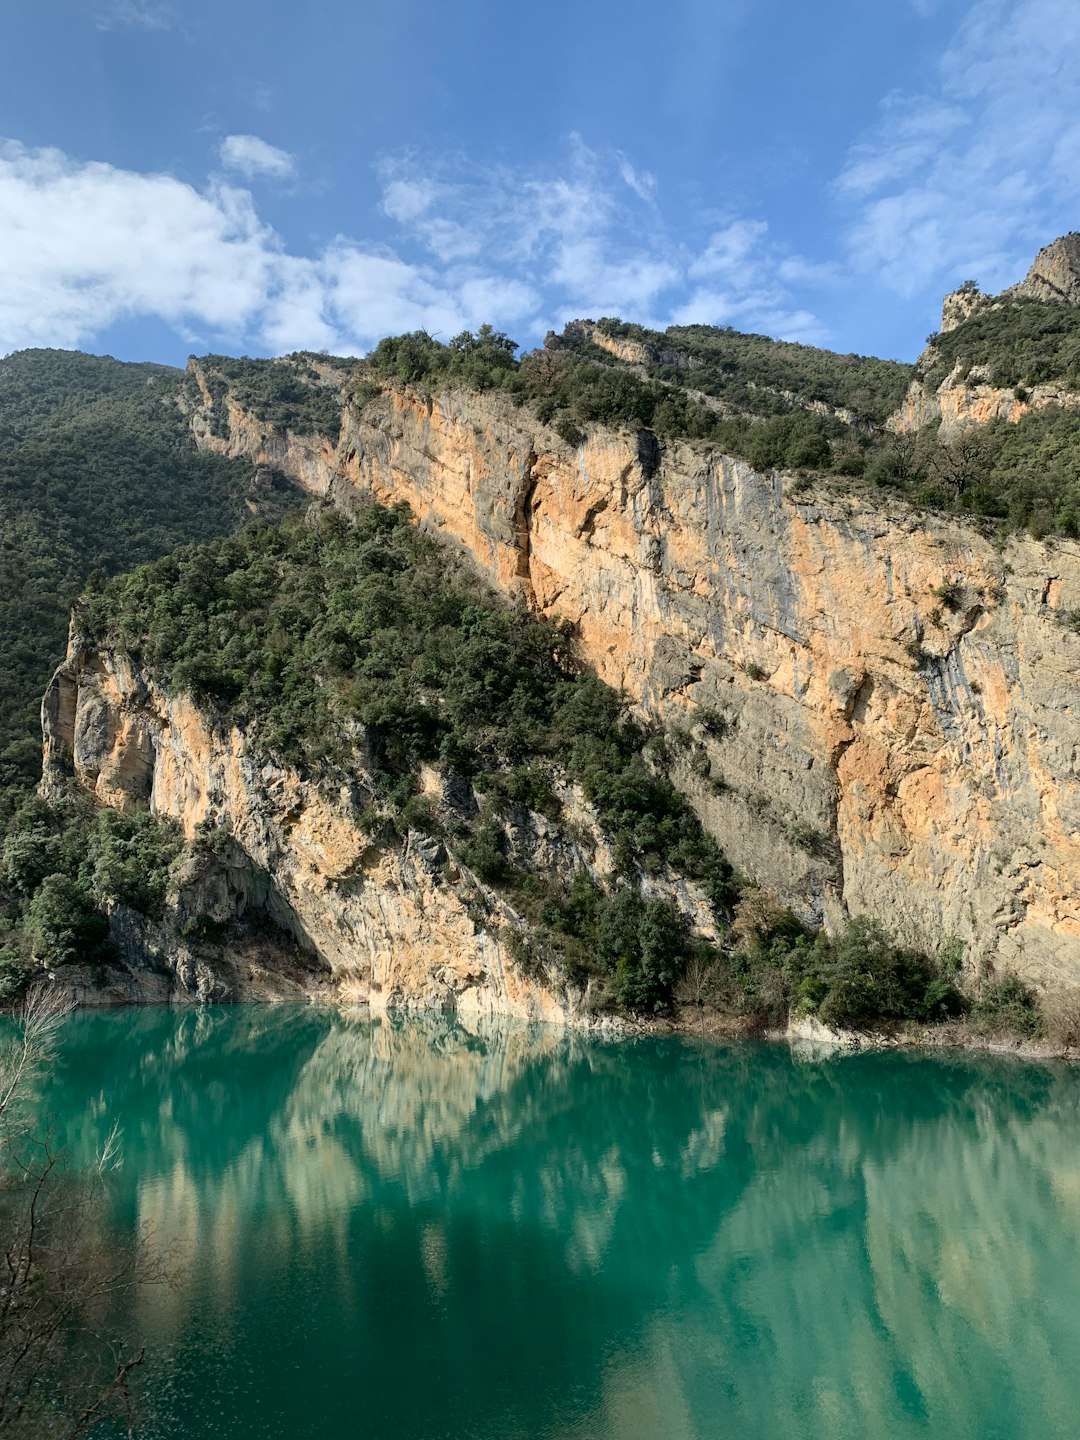 Travel Tips and Stories of Mont-rebei gorge in Spain